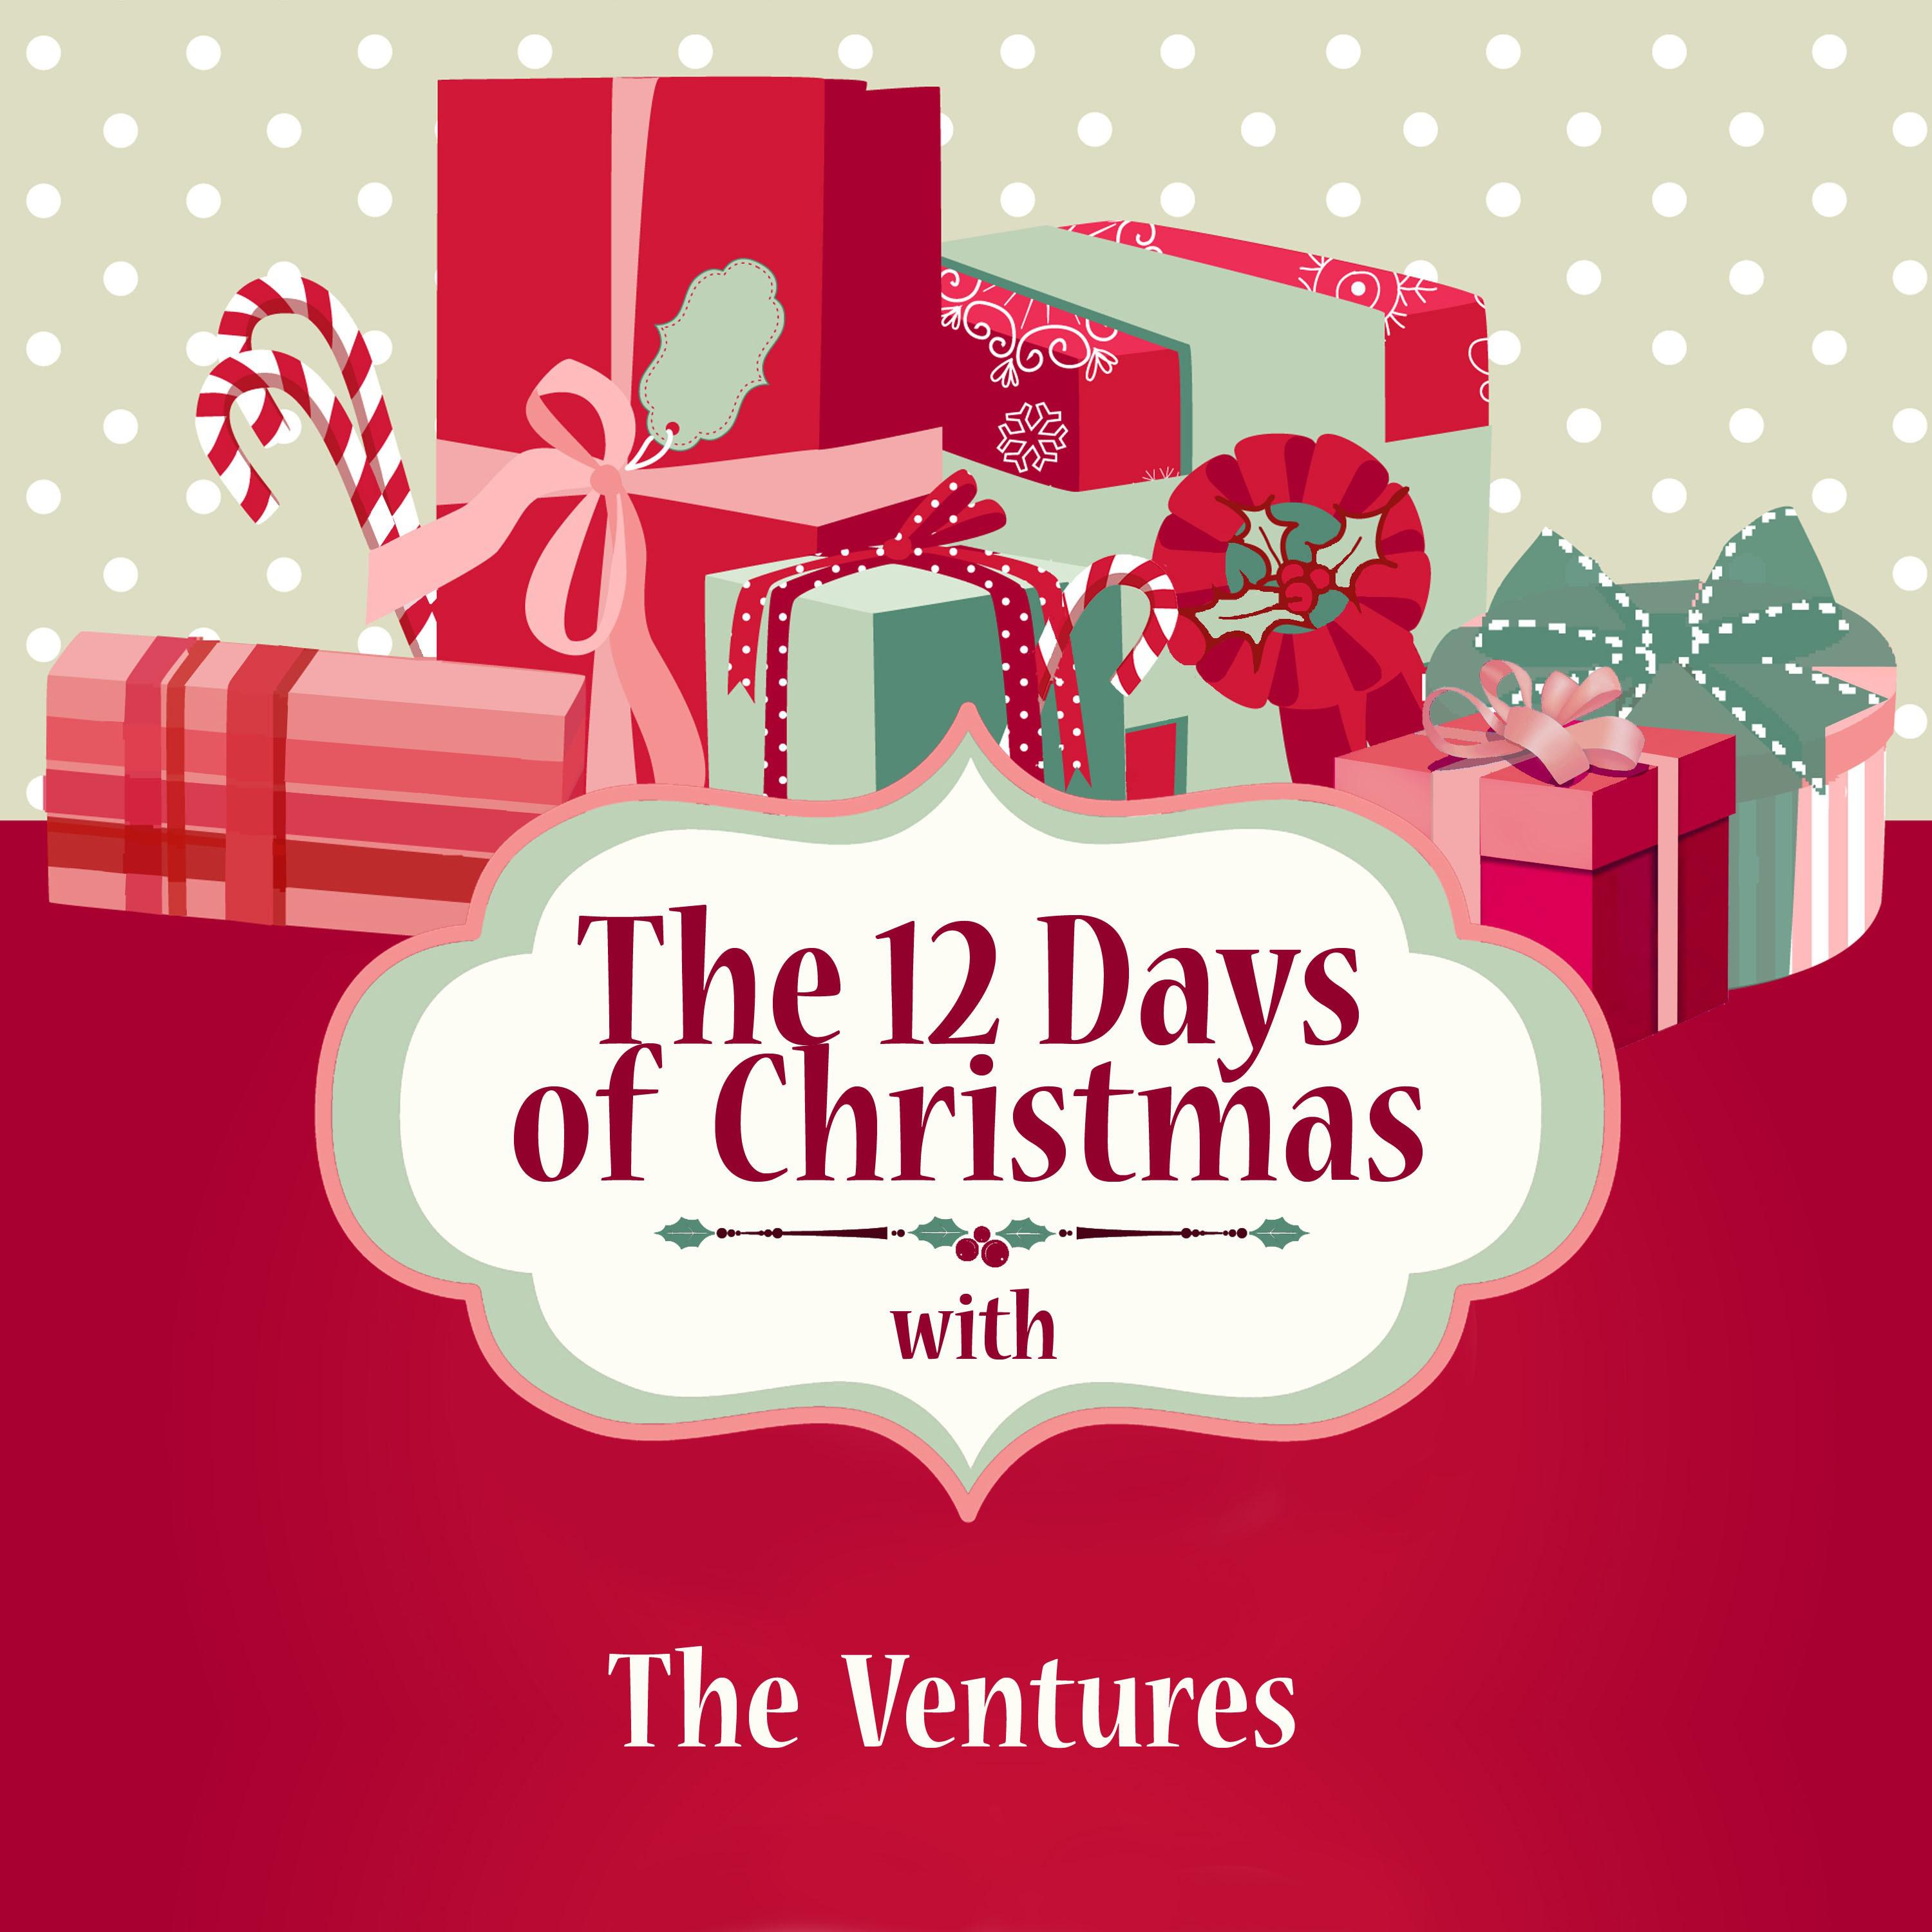 The 12 Days of Christmas with the Ventures